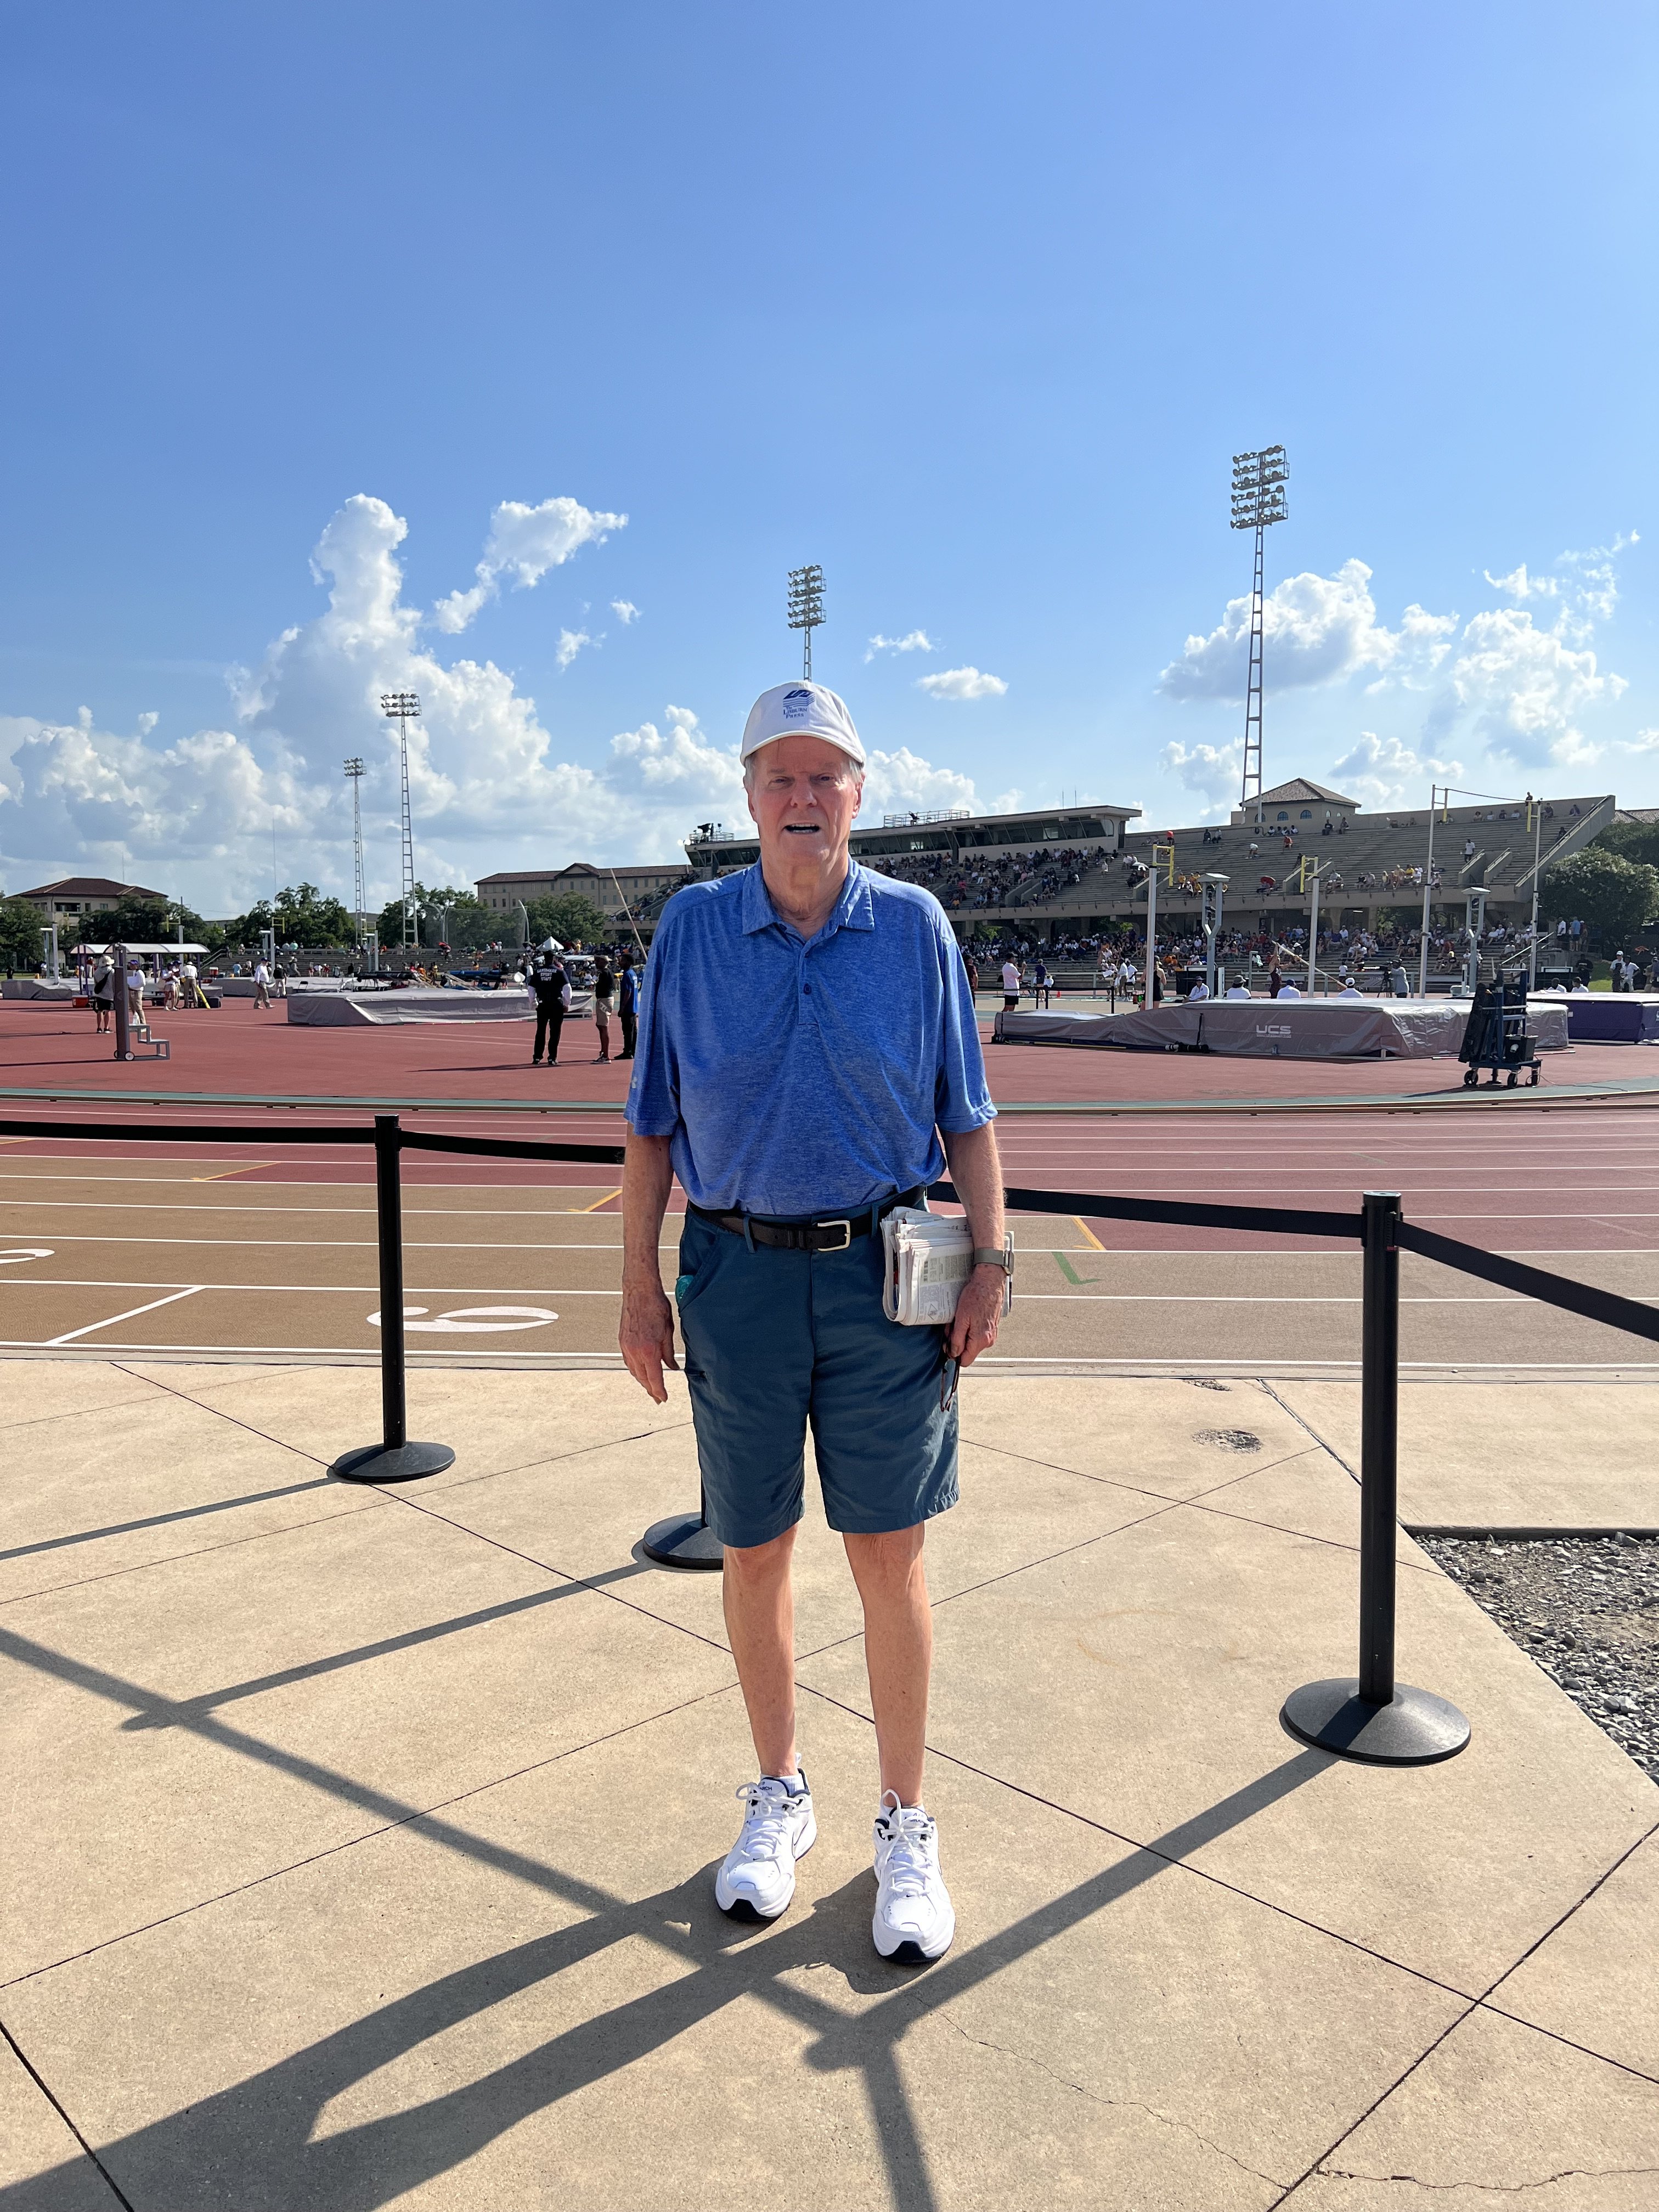 At Furman university in South Carolina where I won the 300 m hurdles, the first time the race was ever run. So guess what? I have the worlds record, right? Well, at least for about three hours.